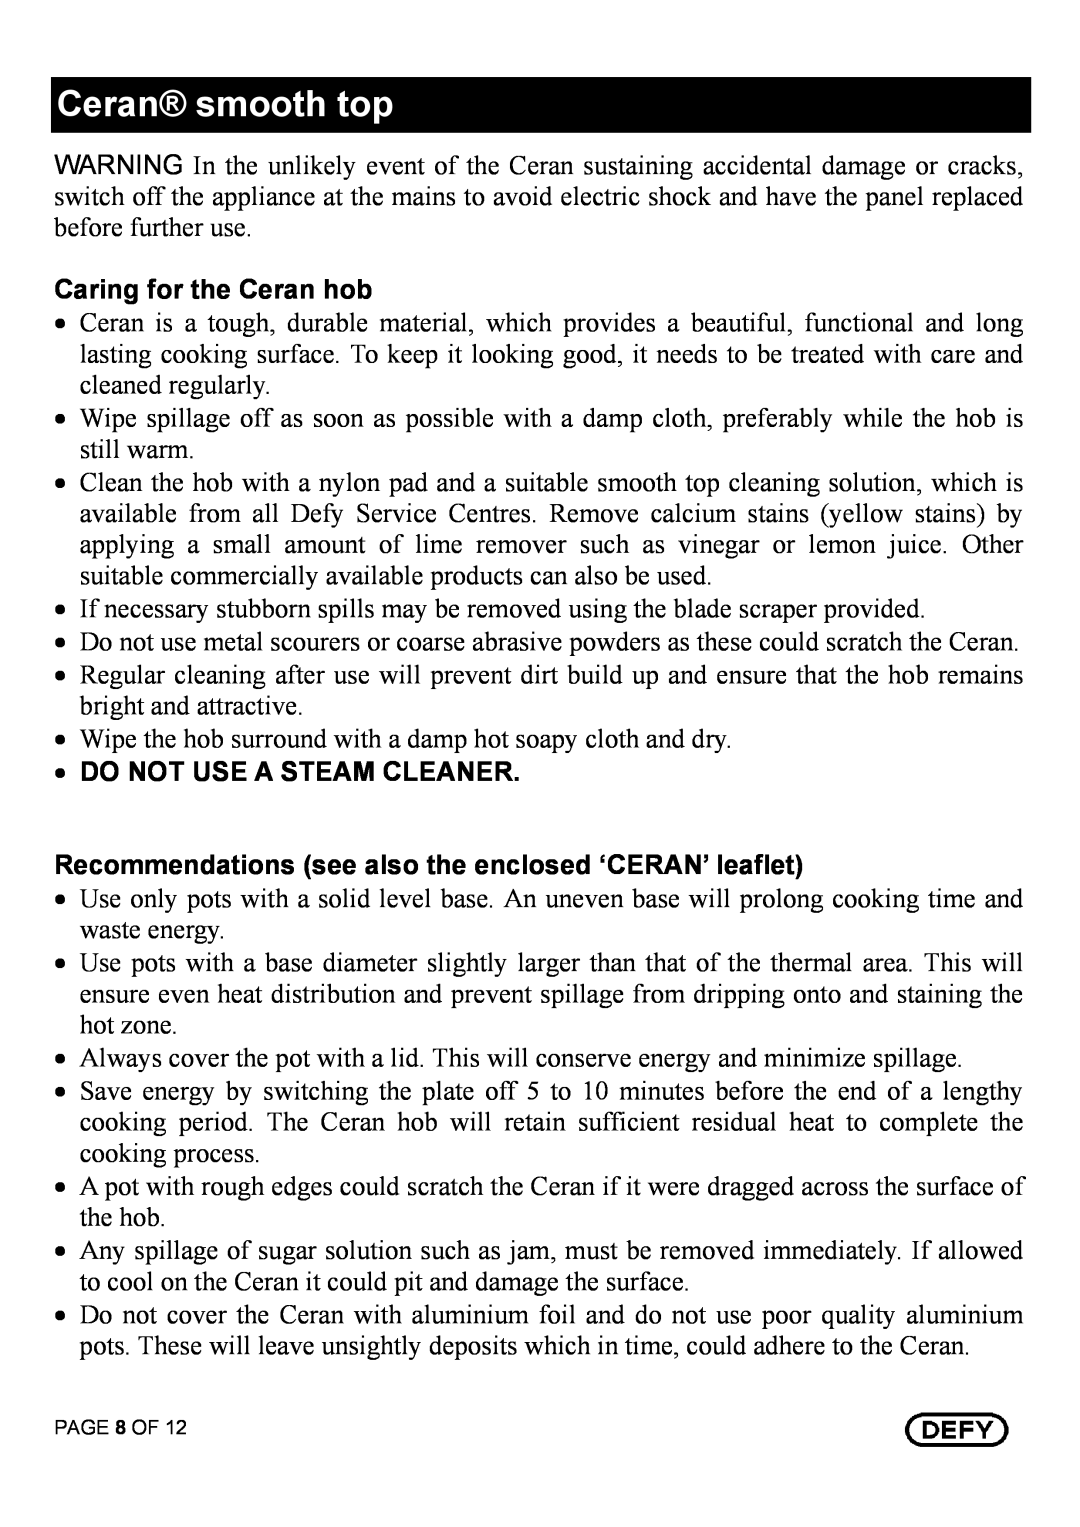 Defy Appliances DHD 394 owner manual Ceran smooth top, Caring for the Ceran hob, Do Not Use A Steam Cleaner 